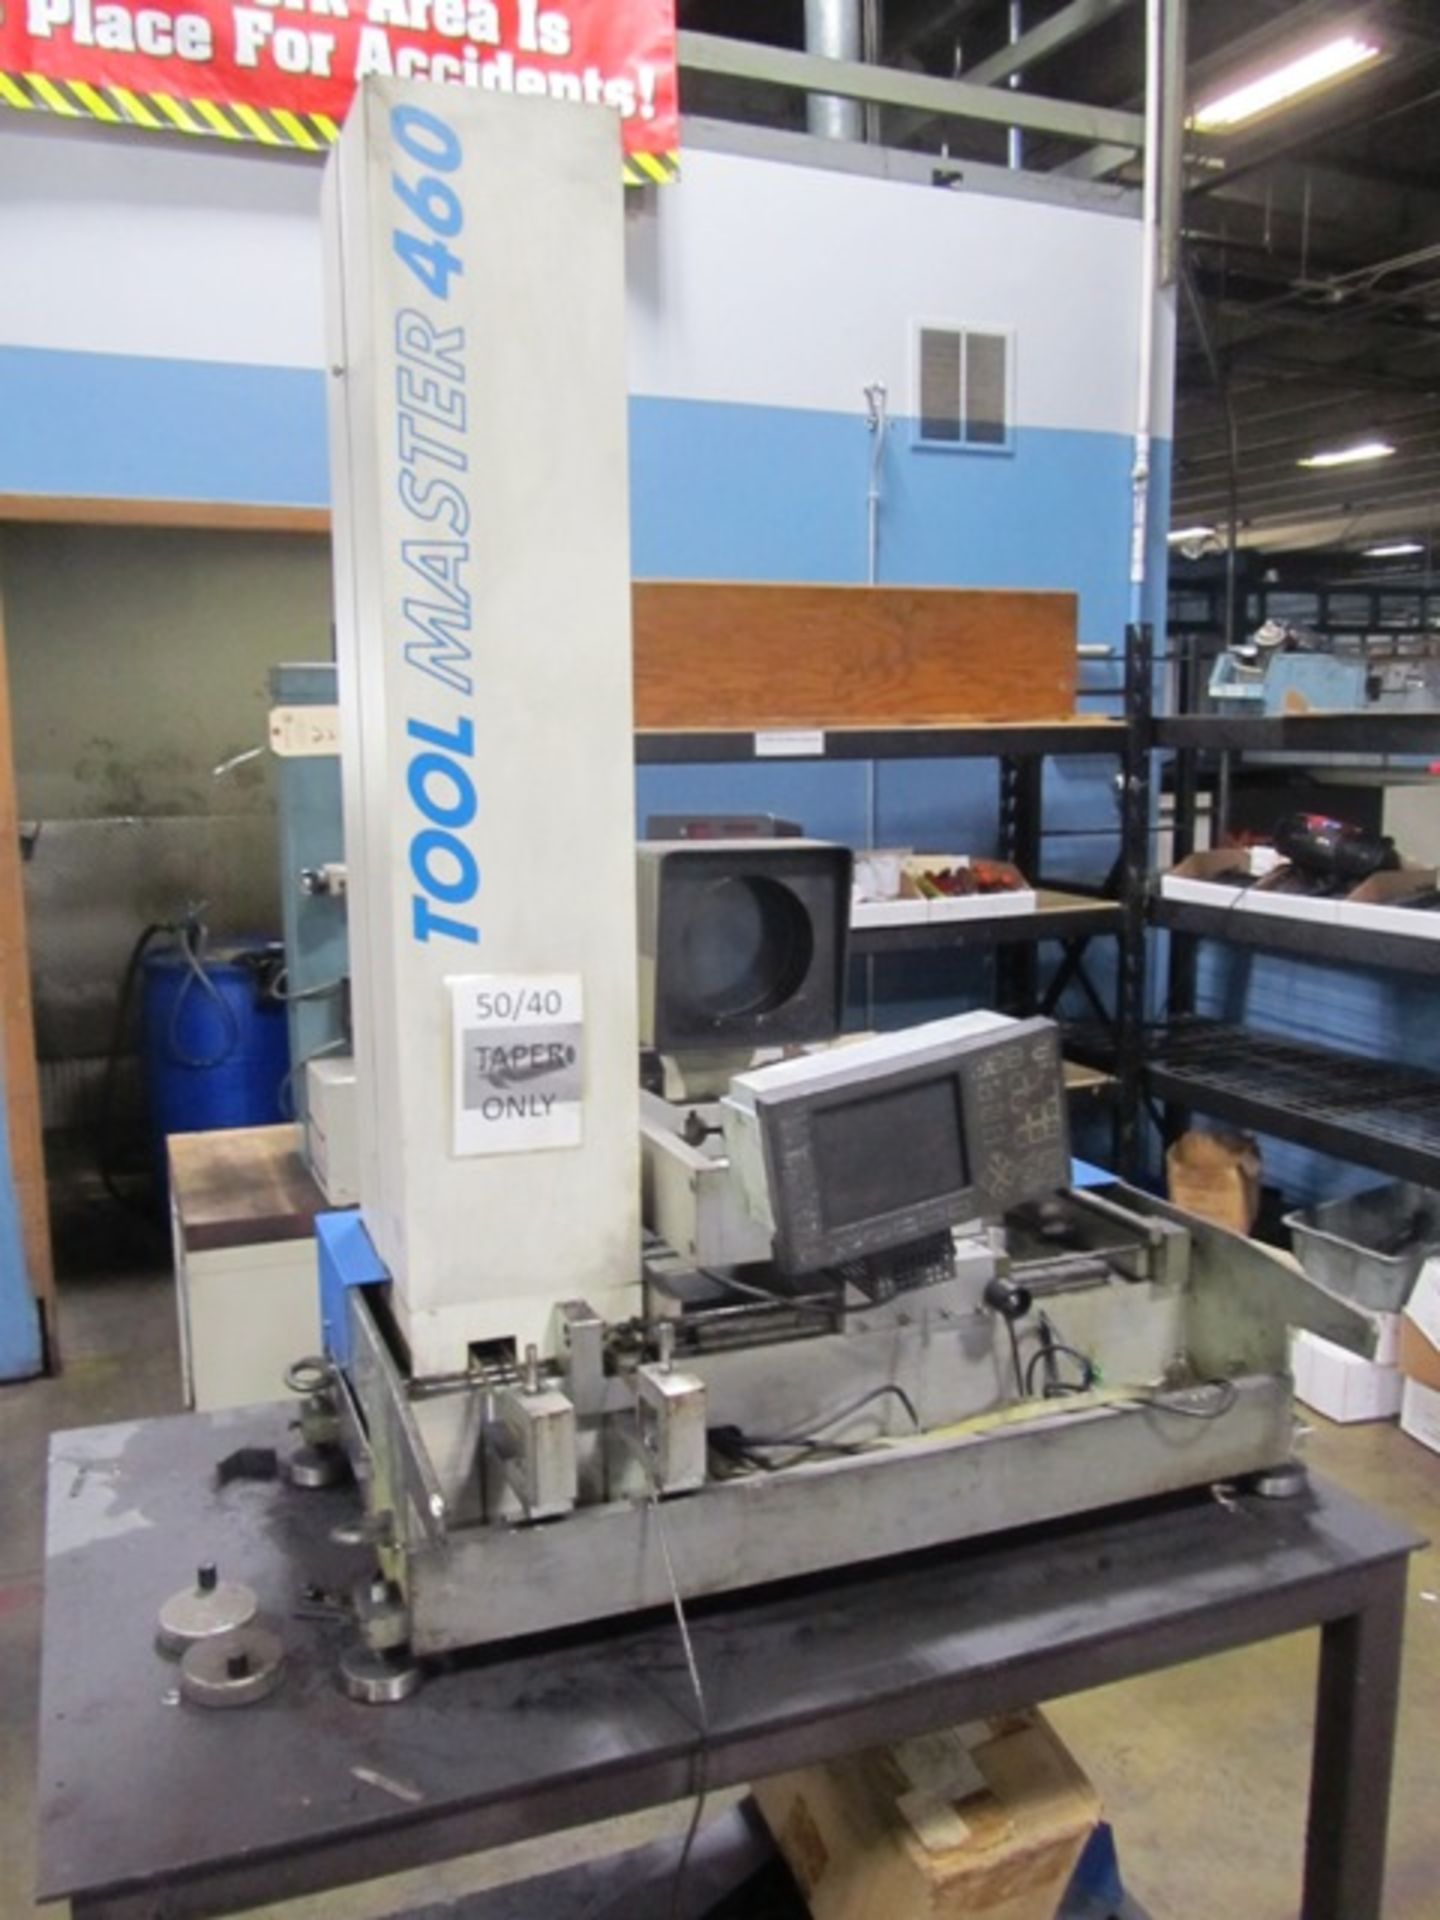 Toolmaster 460 50/40 Taper Tool Presetter with Digital Readout